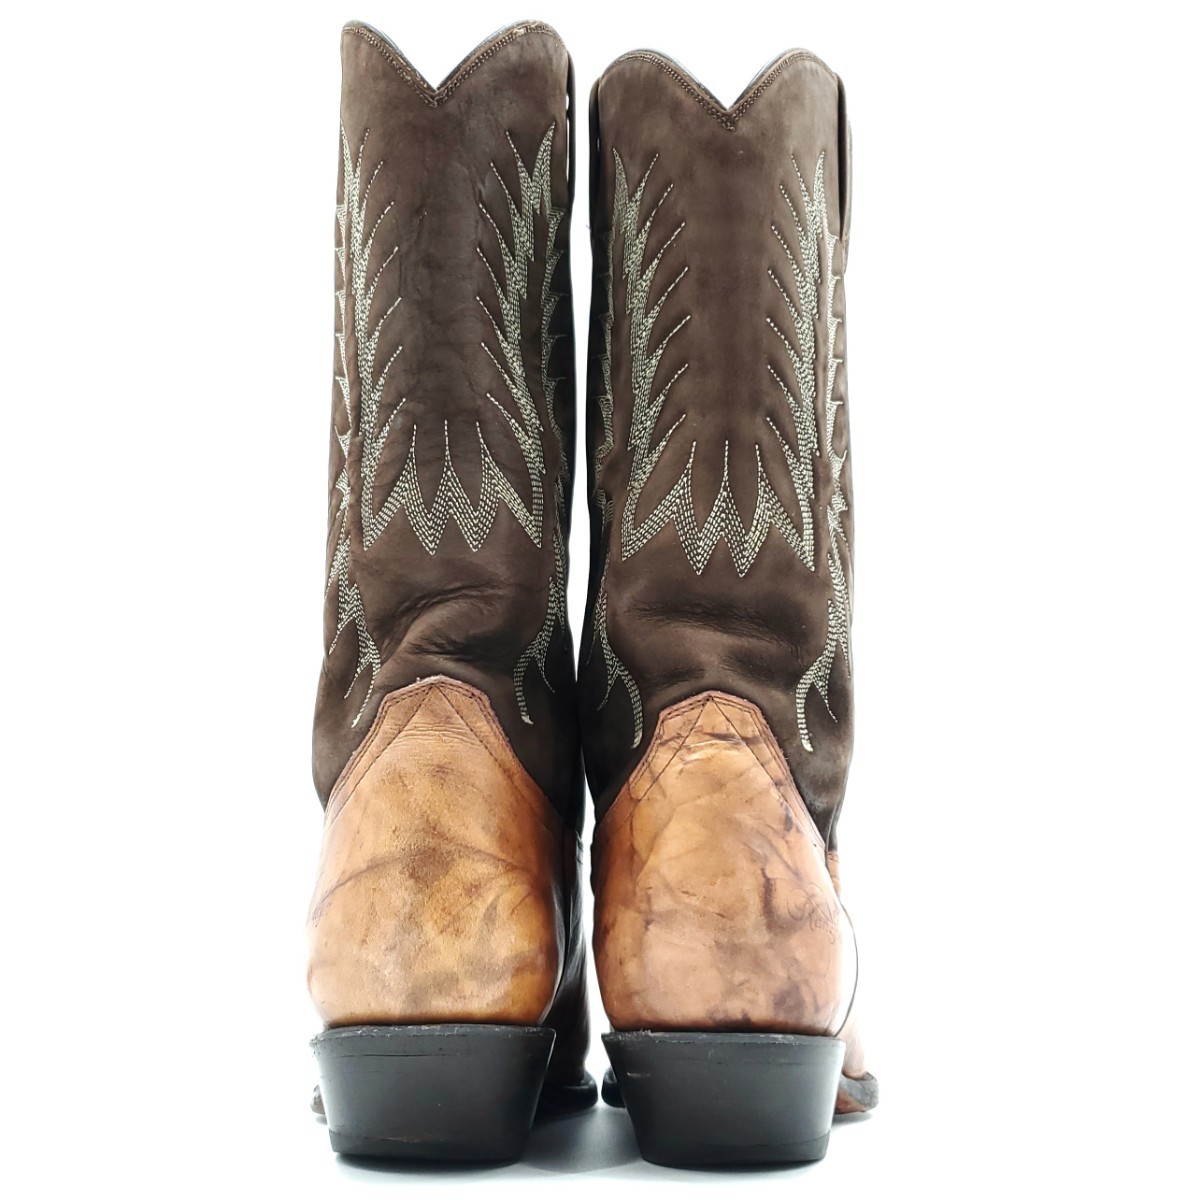  superior article Mexico made *Rancho* approximately 26.5cm leather western boots tea marble US8.5EE men's original leather Rancho real leather long kau Boy lai DIN gSZS62